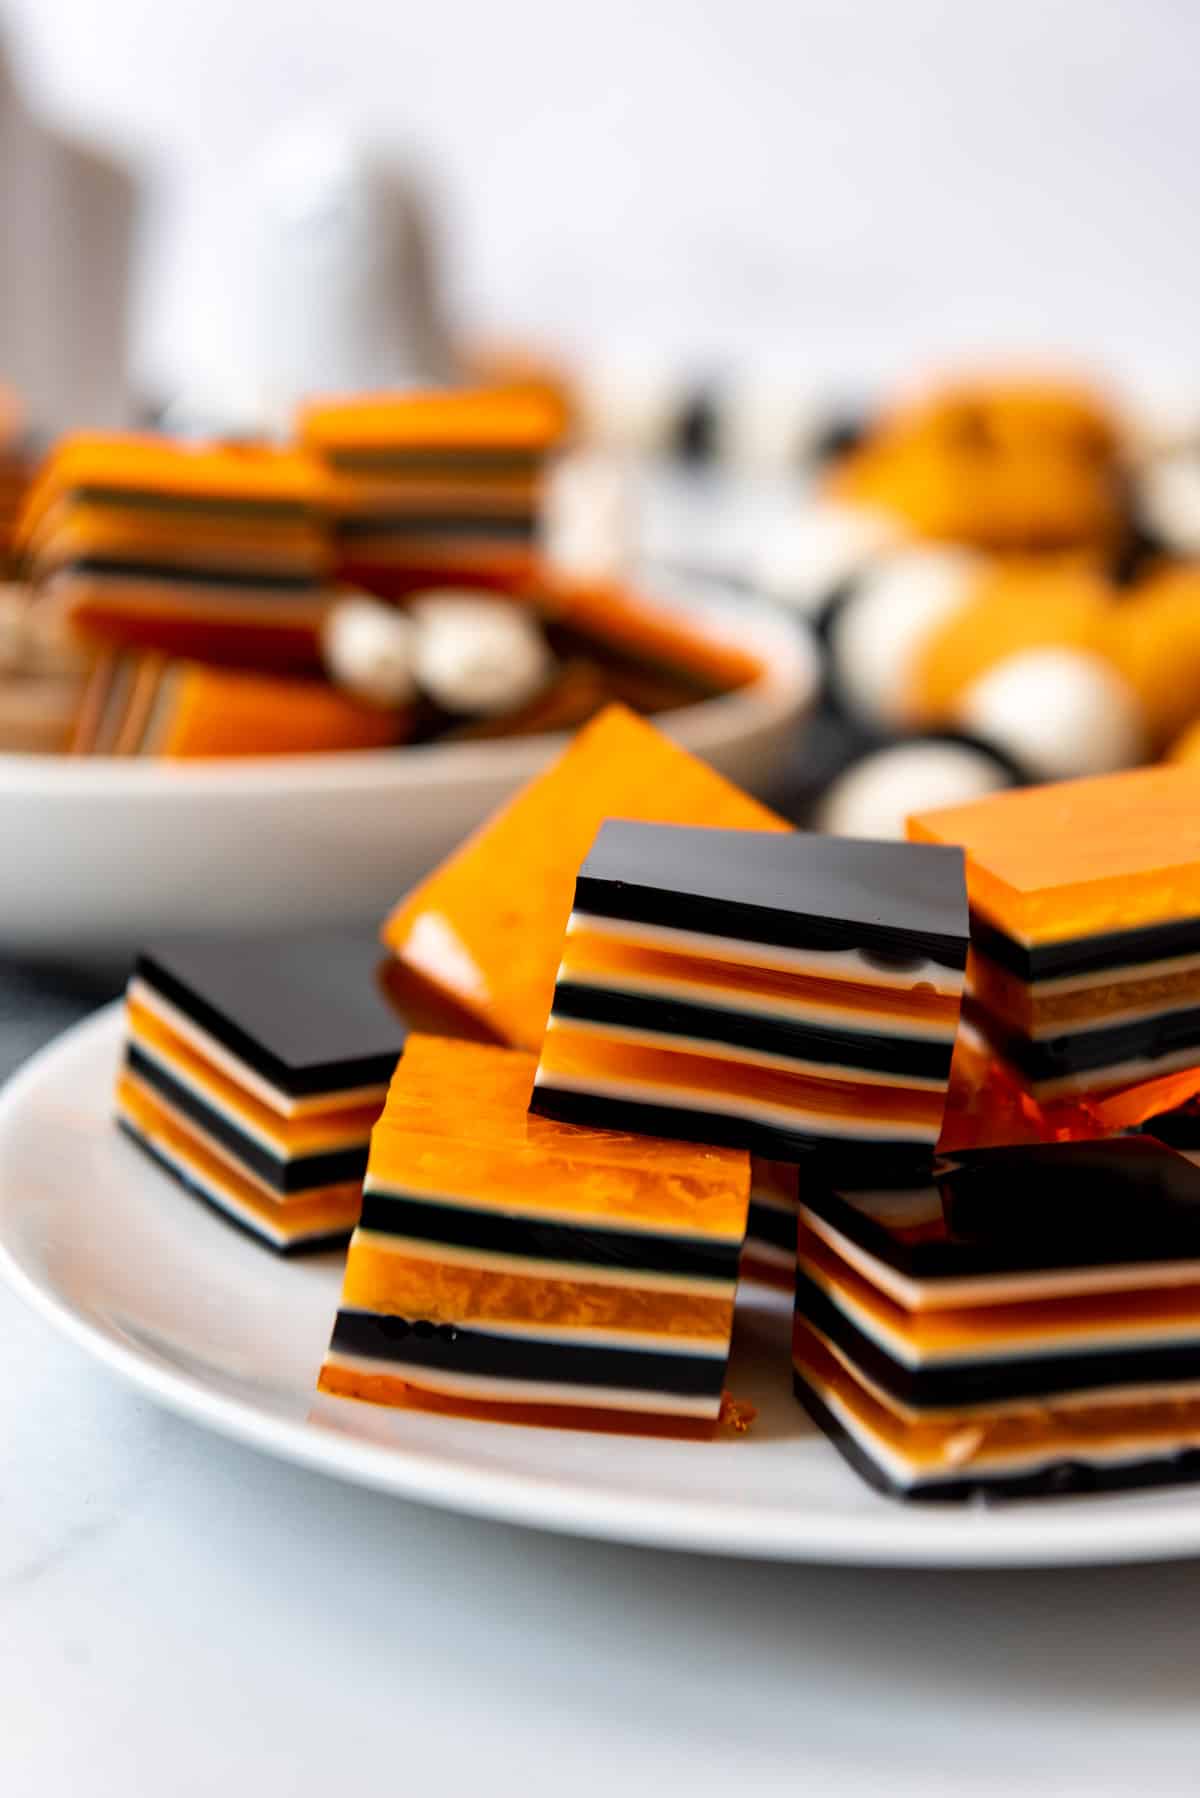 Layered Halloween jello squares on a white plate.